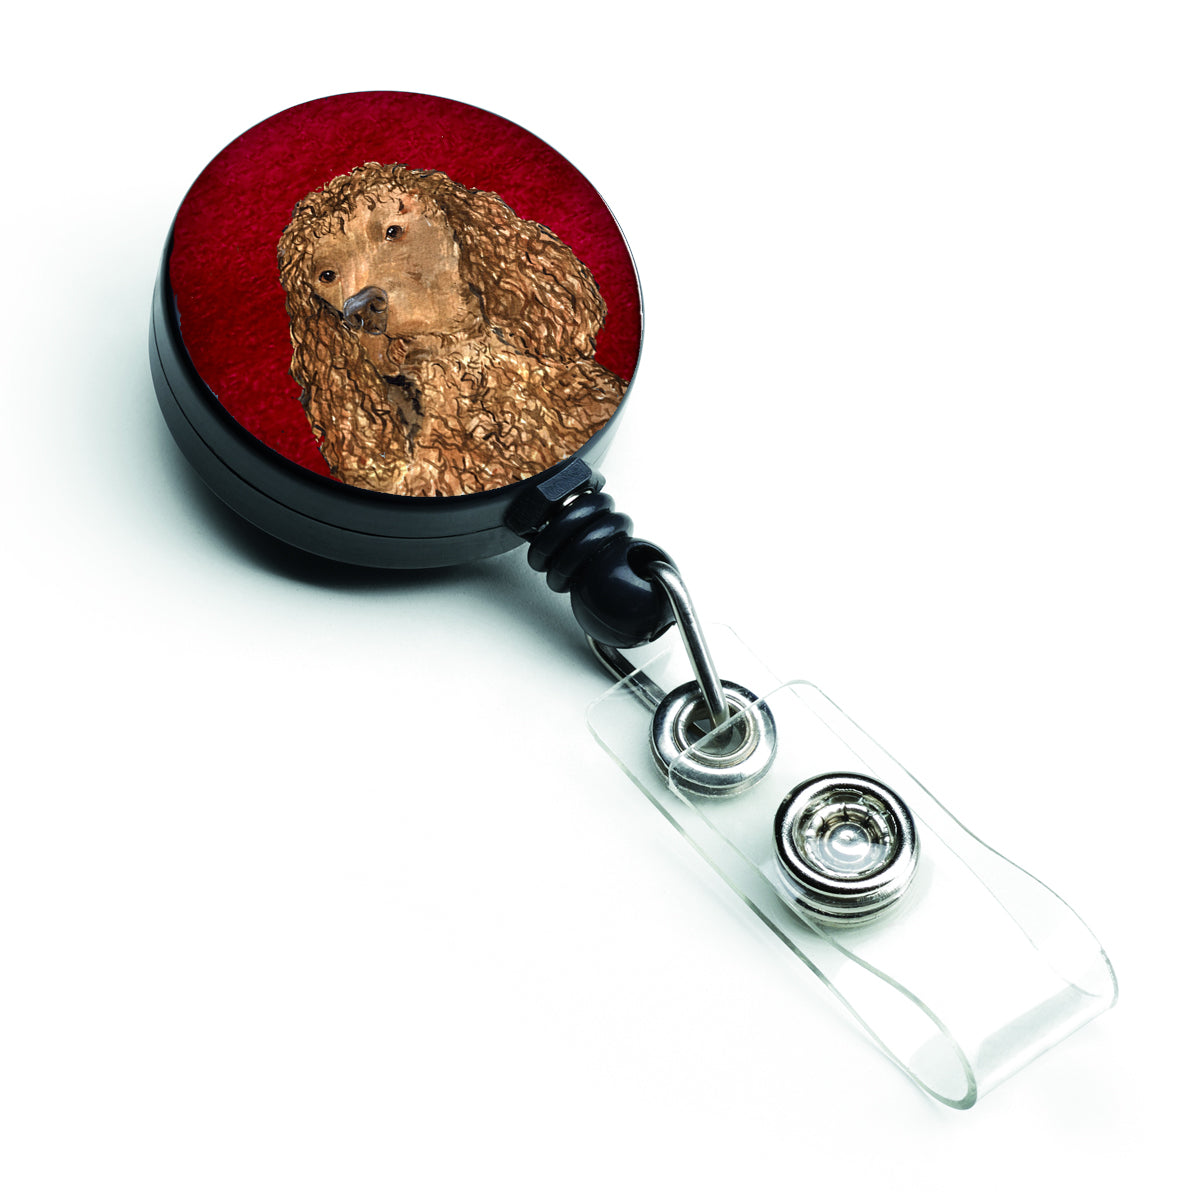 American Water Spaniel Retractable Badge Reel or ID Holder with Clip.